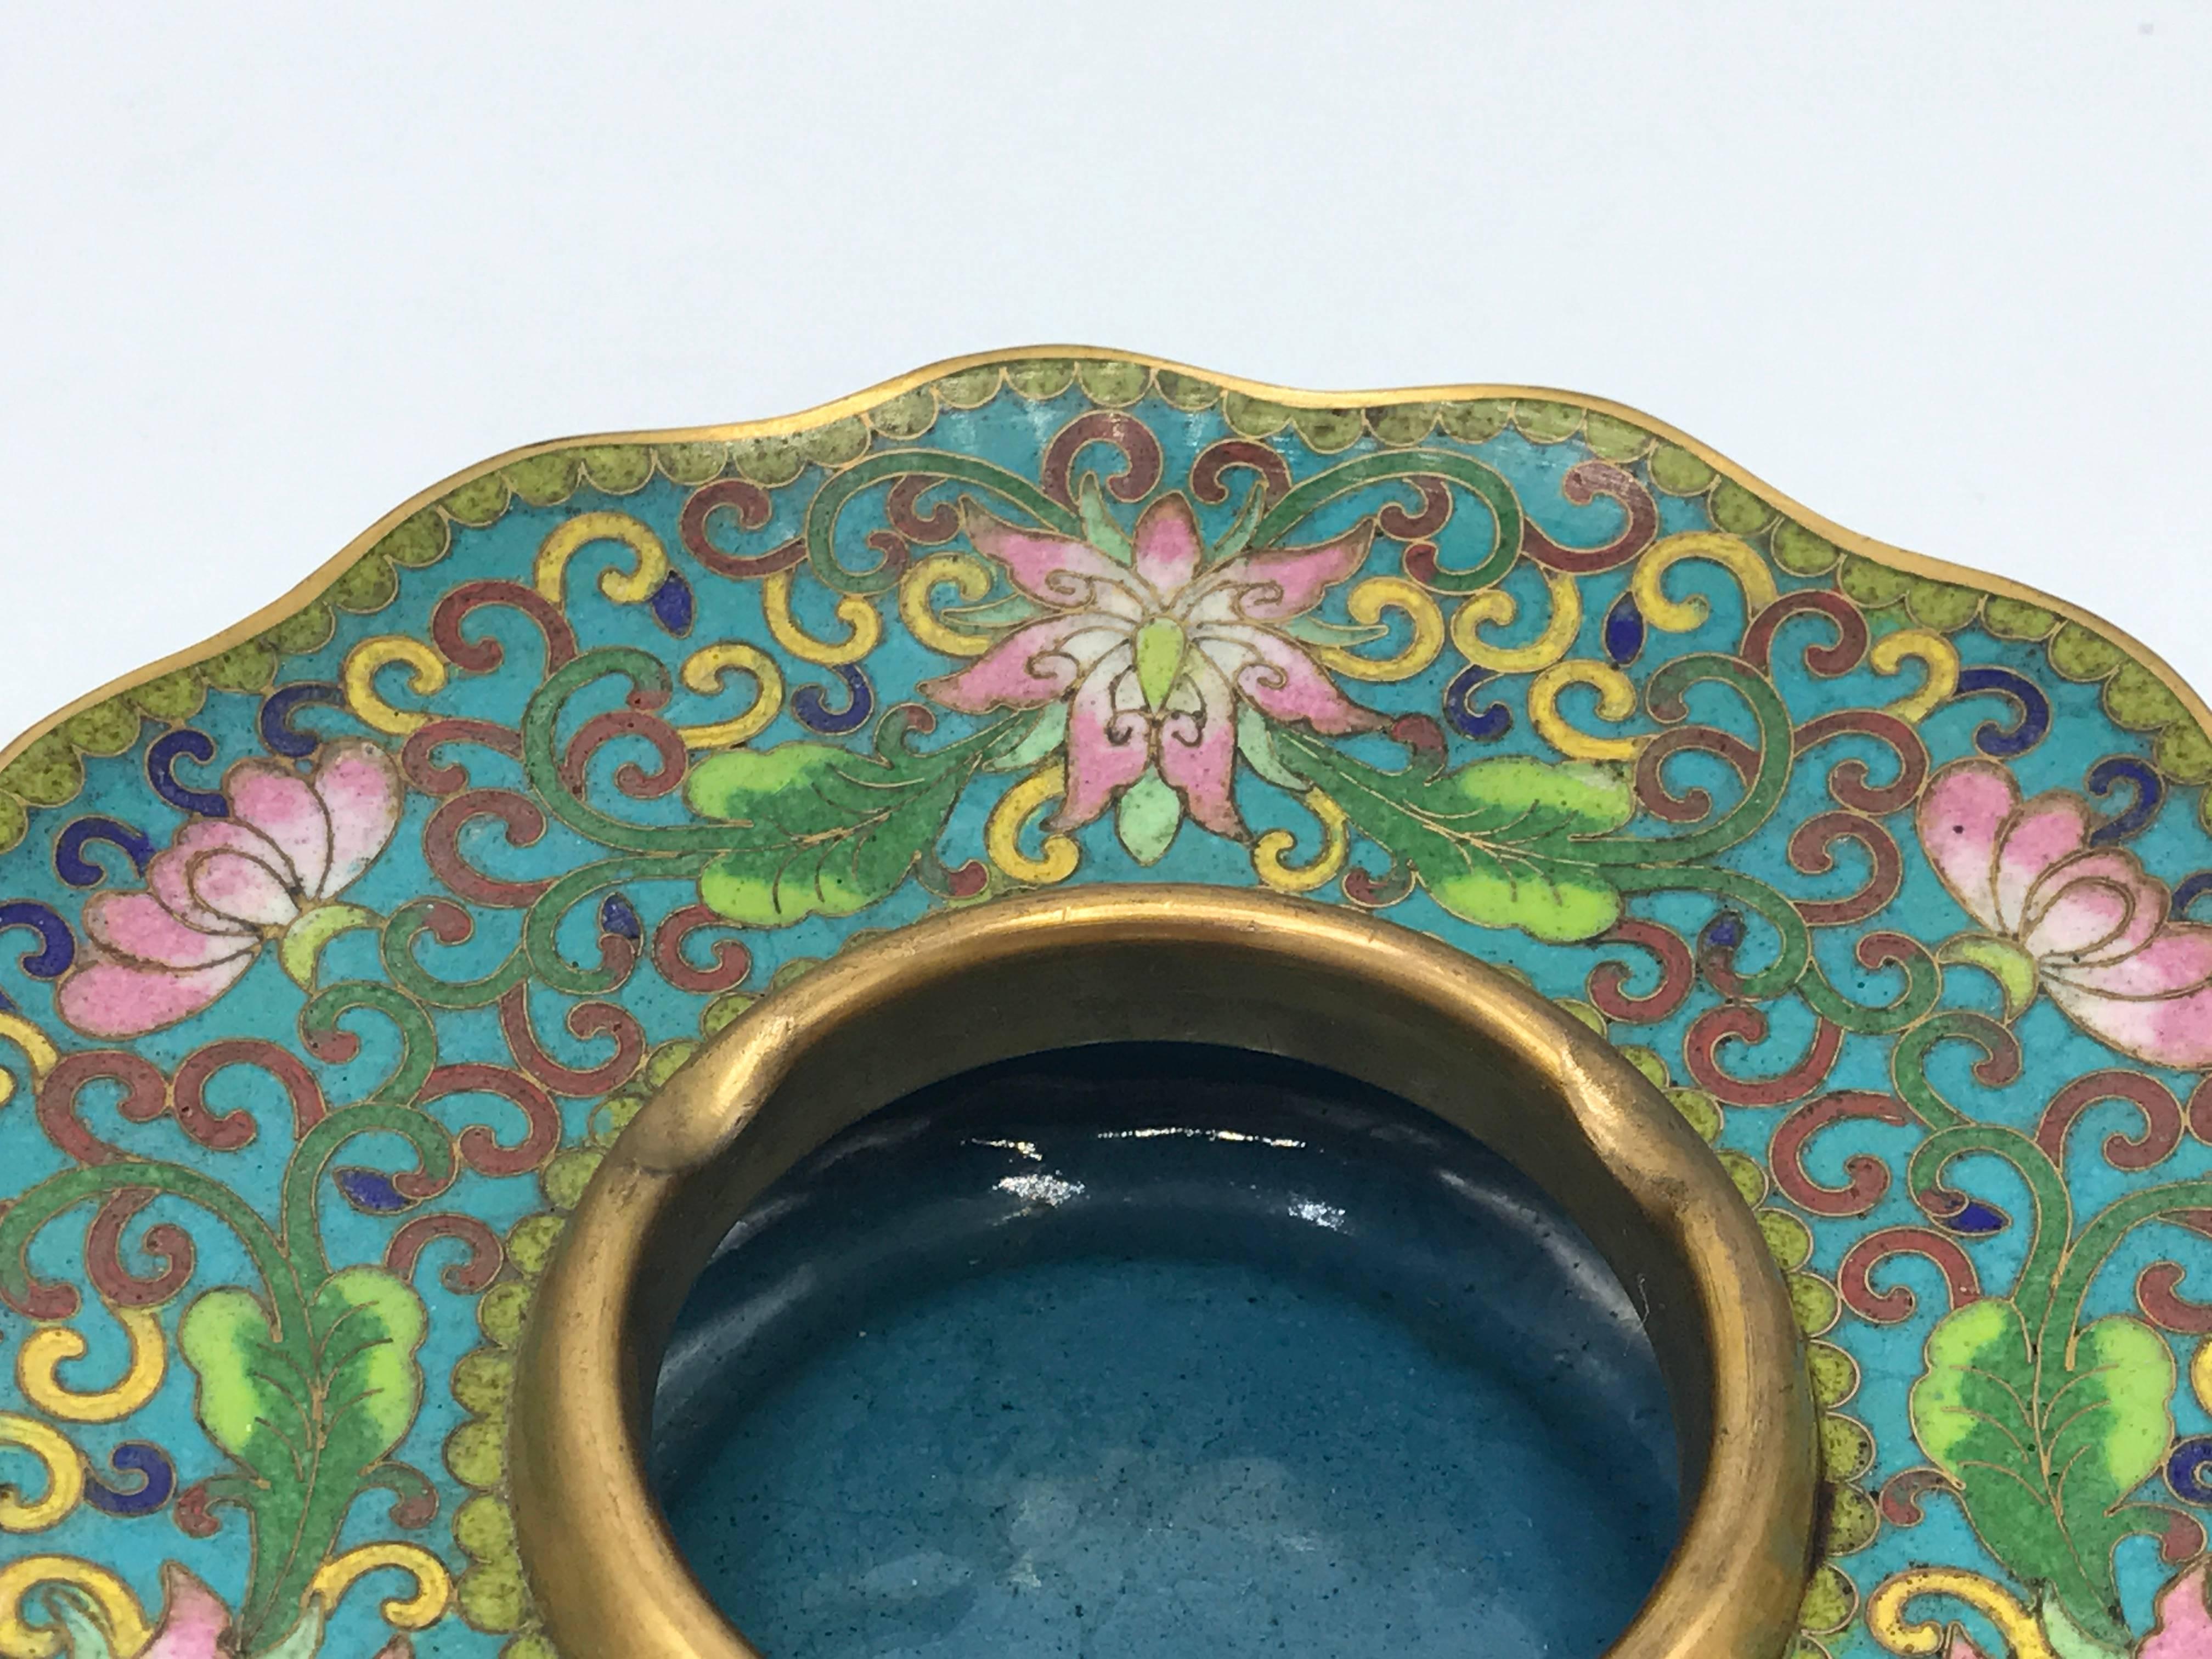 Offered is a gorgeous, 1950s cloisonné blue and green ashtray with a floral motif. Looks as if it was never used.